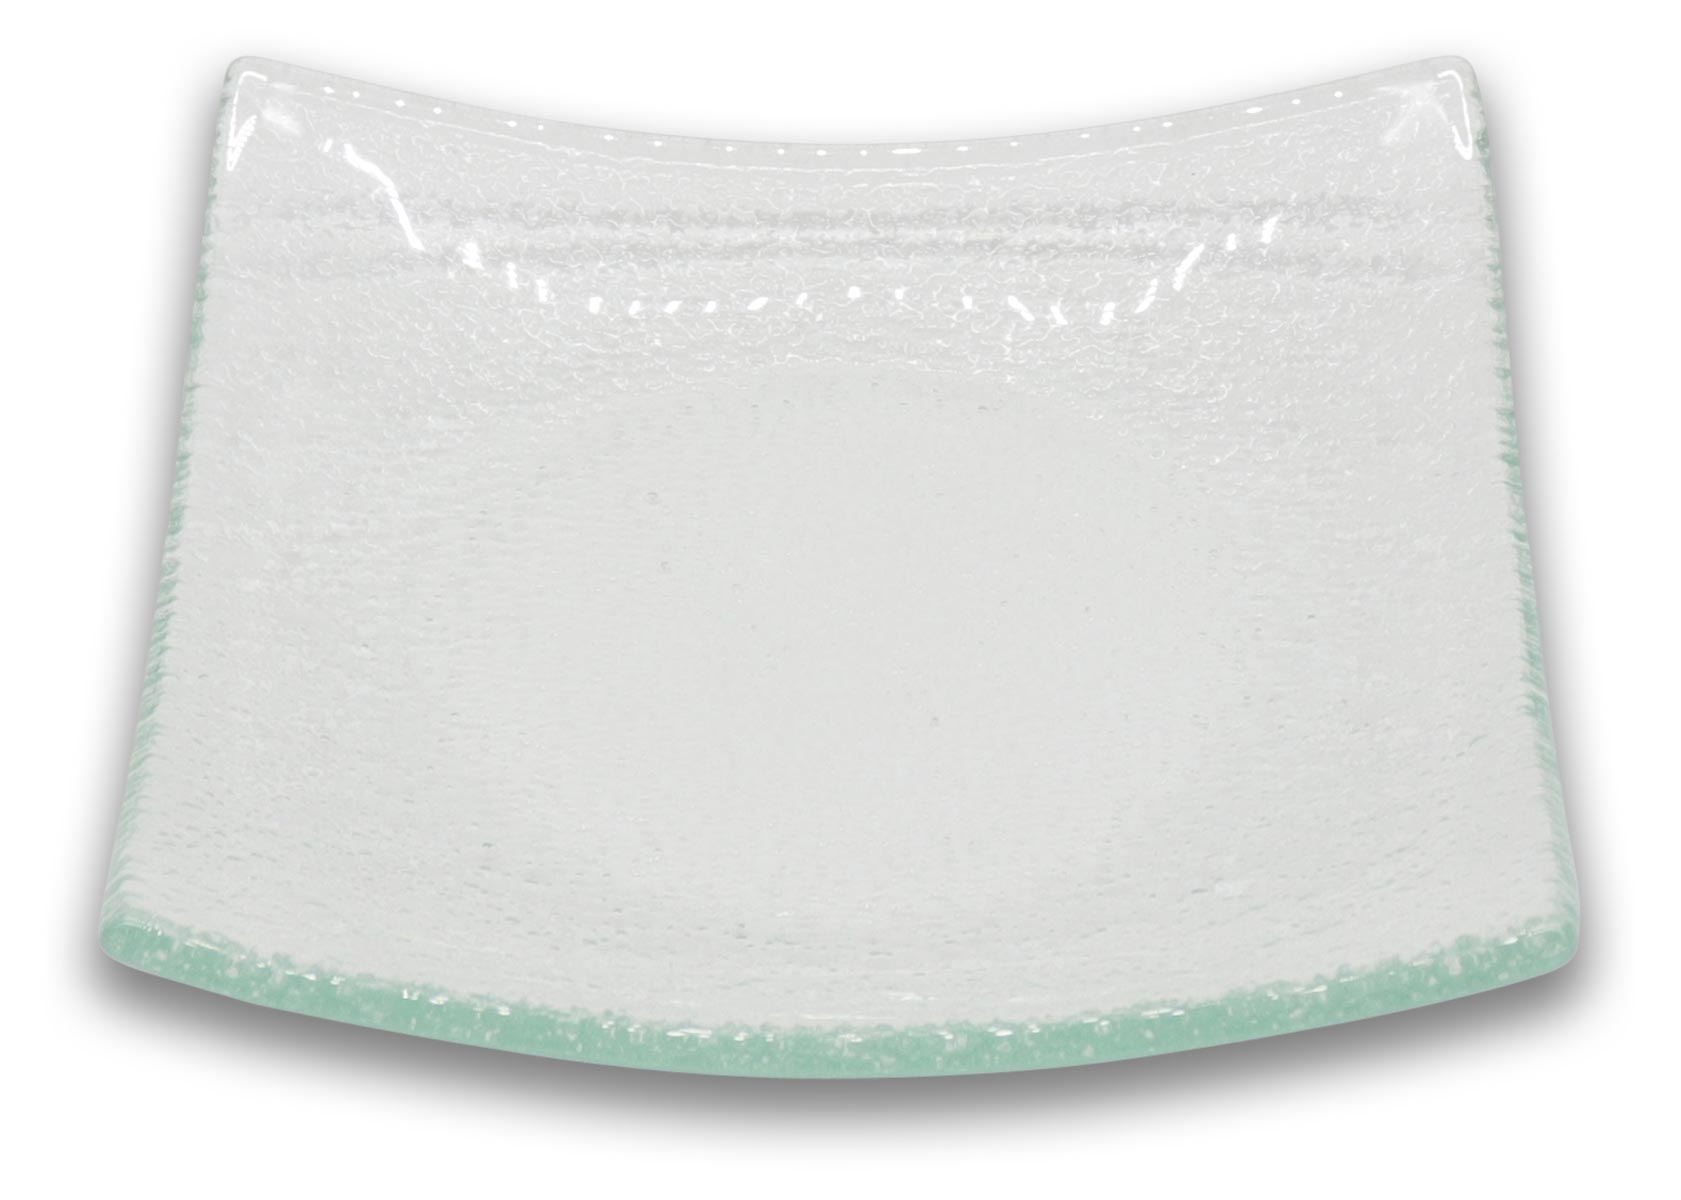 Vaulted glass plate clear